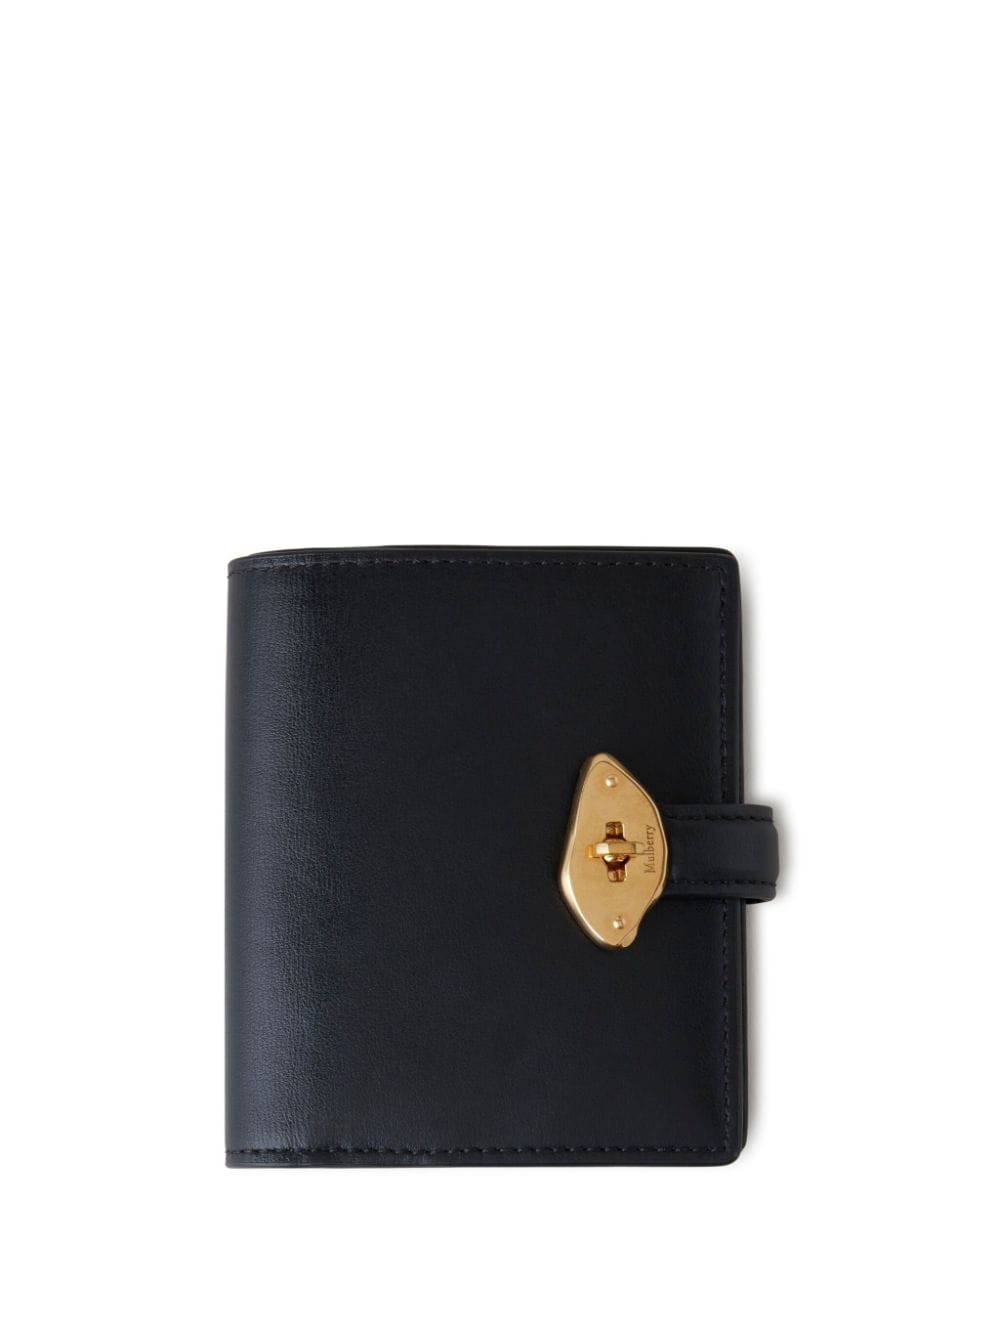 Mulberry Lana compact leather wallet - Black von Mulberry